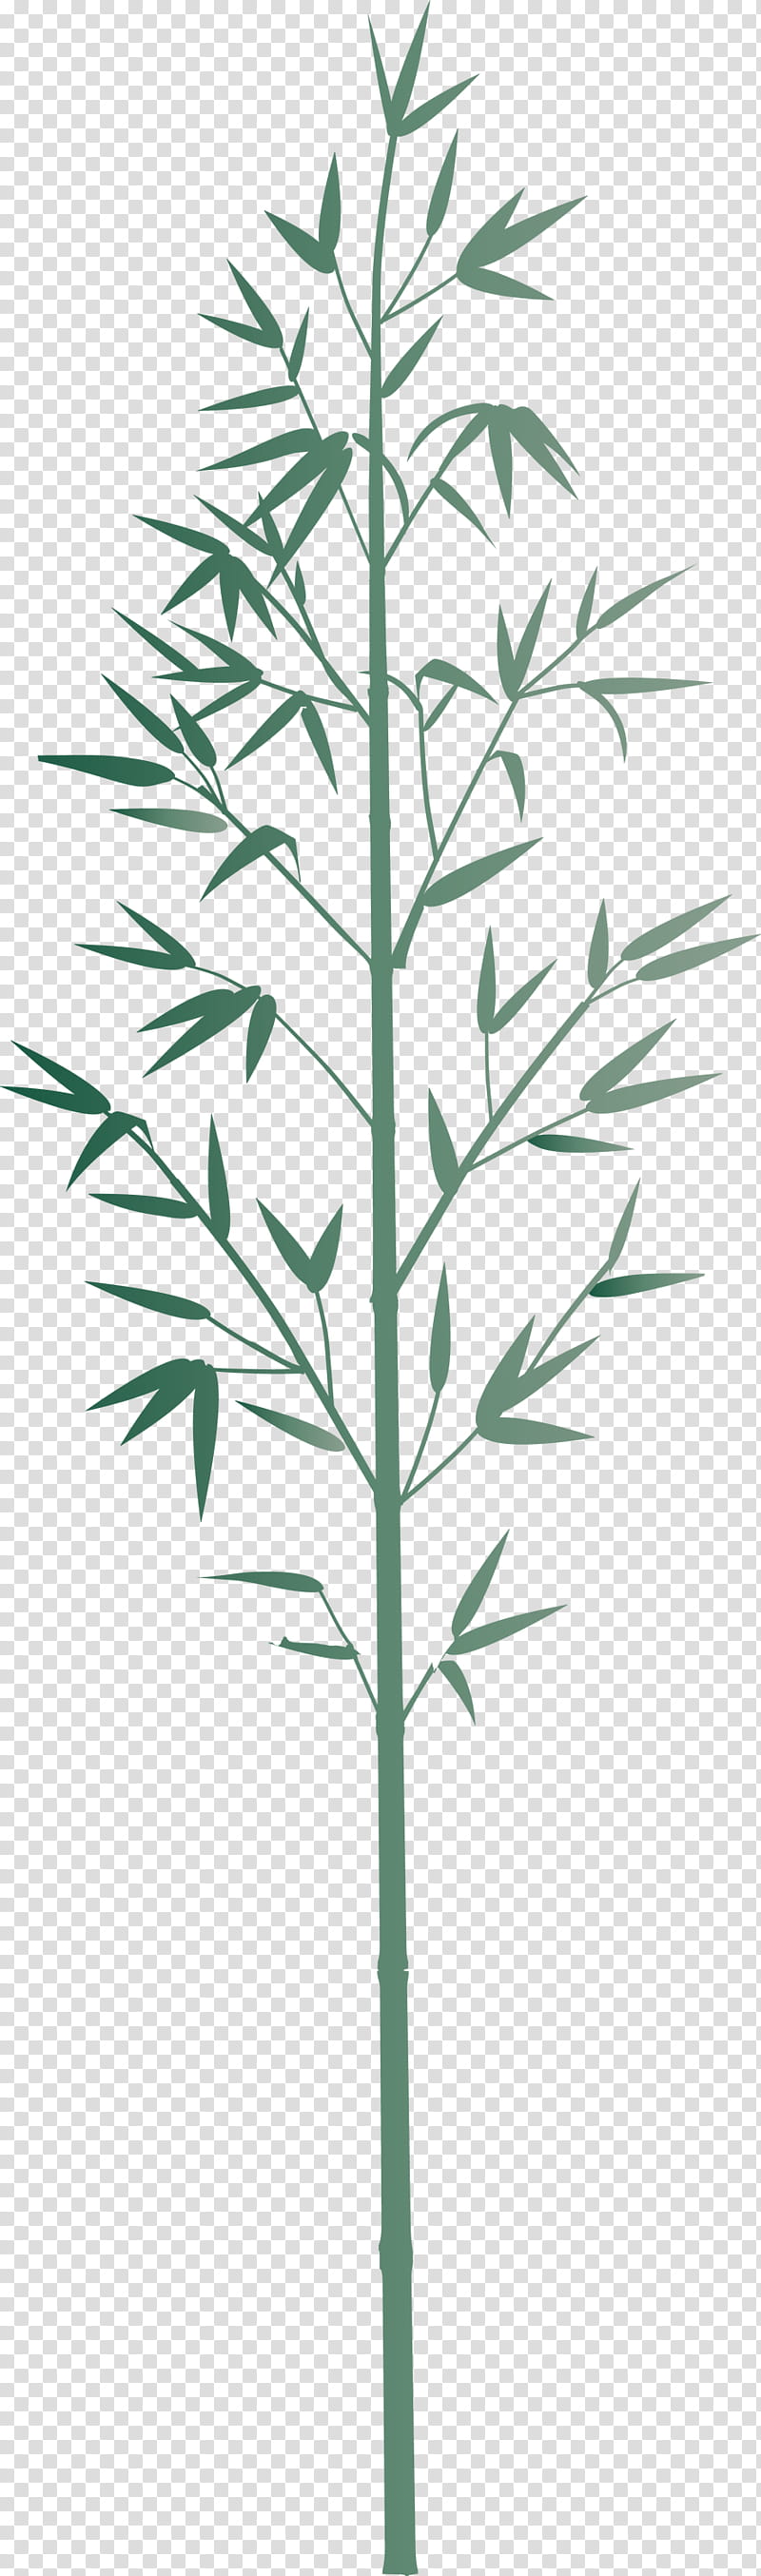 bamboo leaf, Plant, Flower, Grass Family, Plant Stem, American Larch, Southernwood, Elymus Repens transparent background PNG clipart